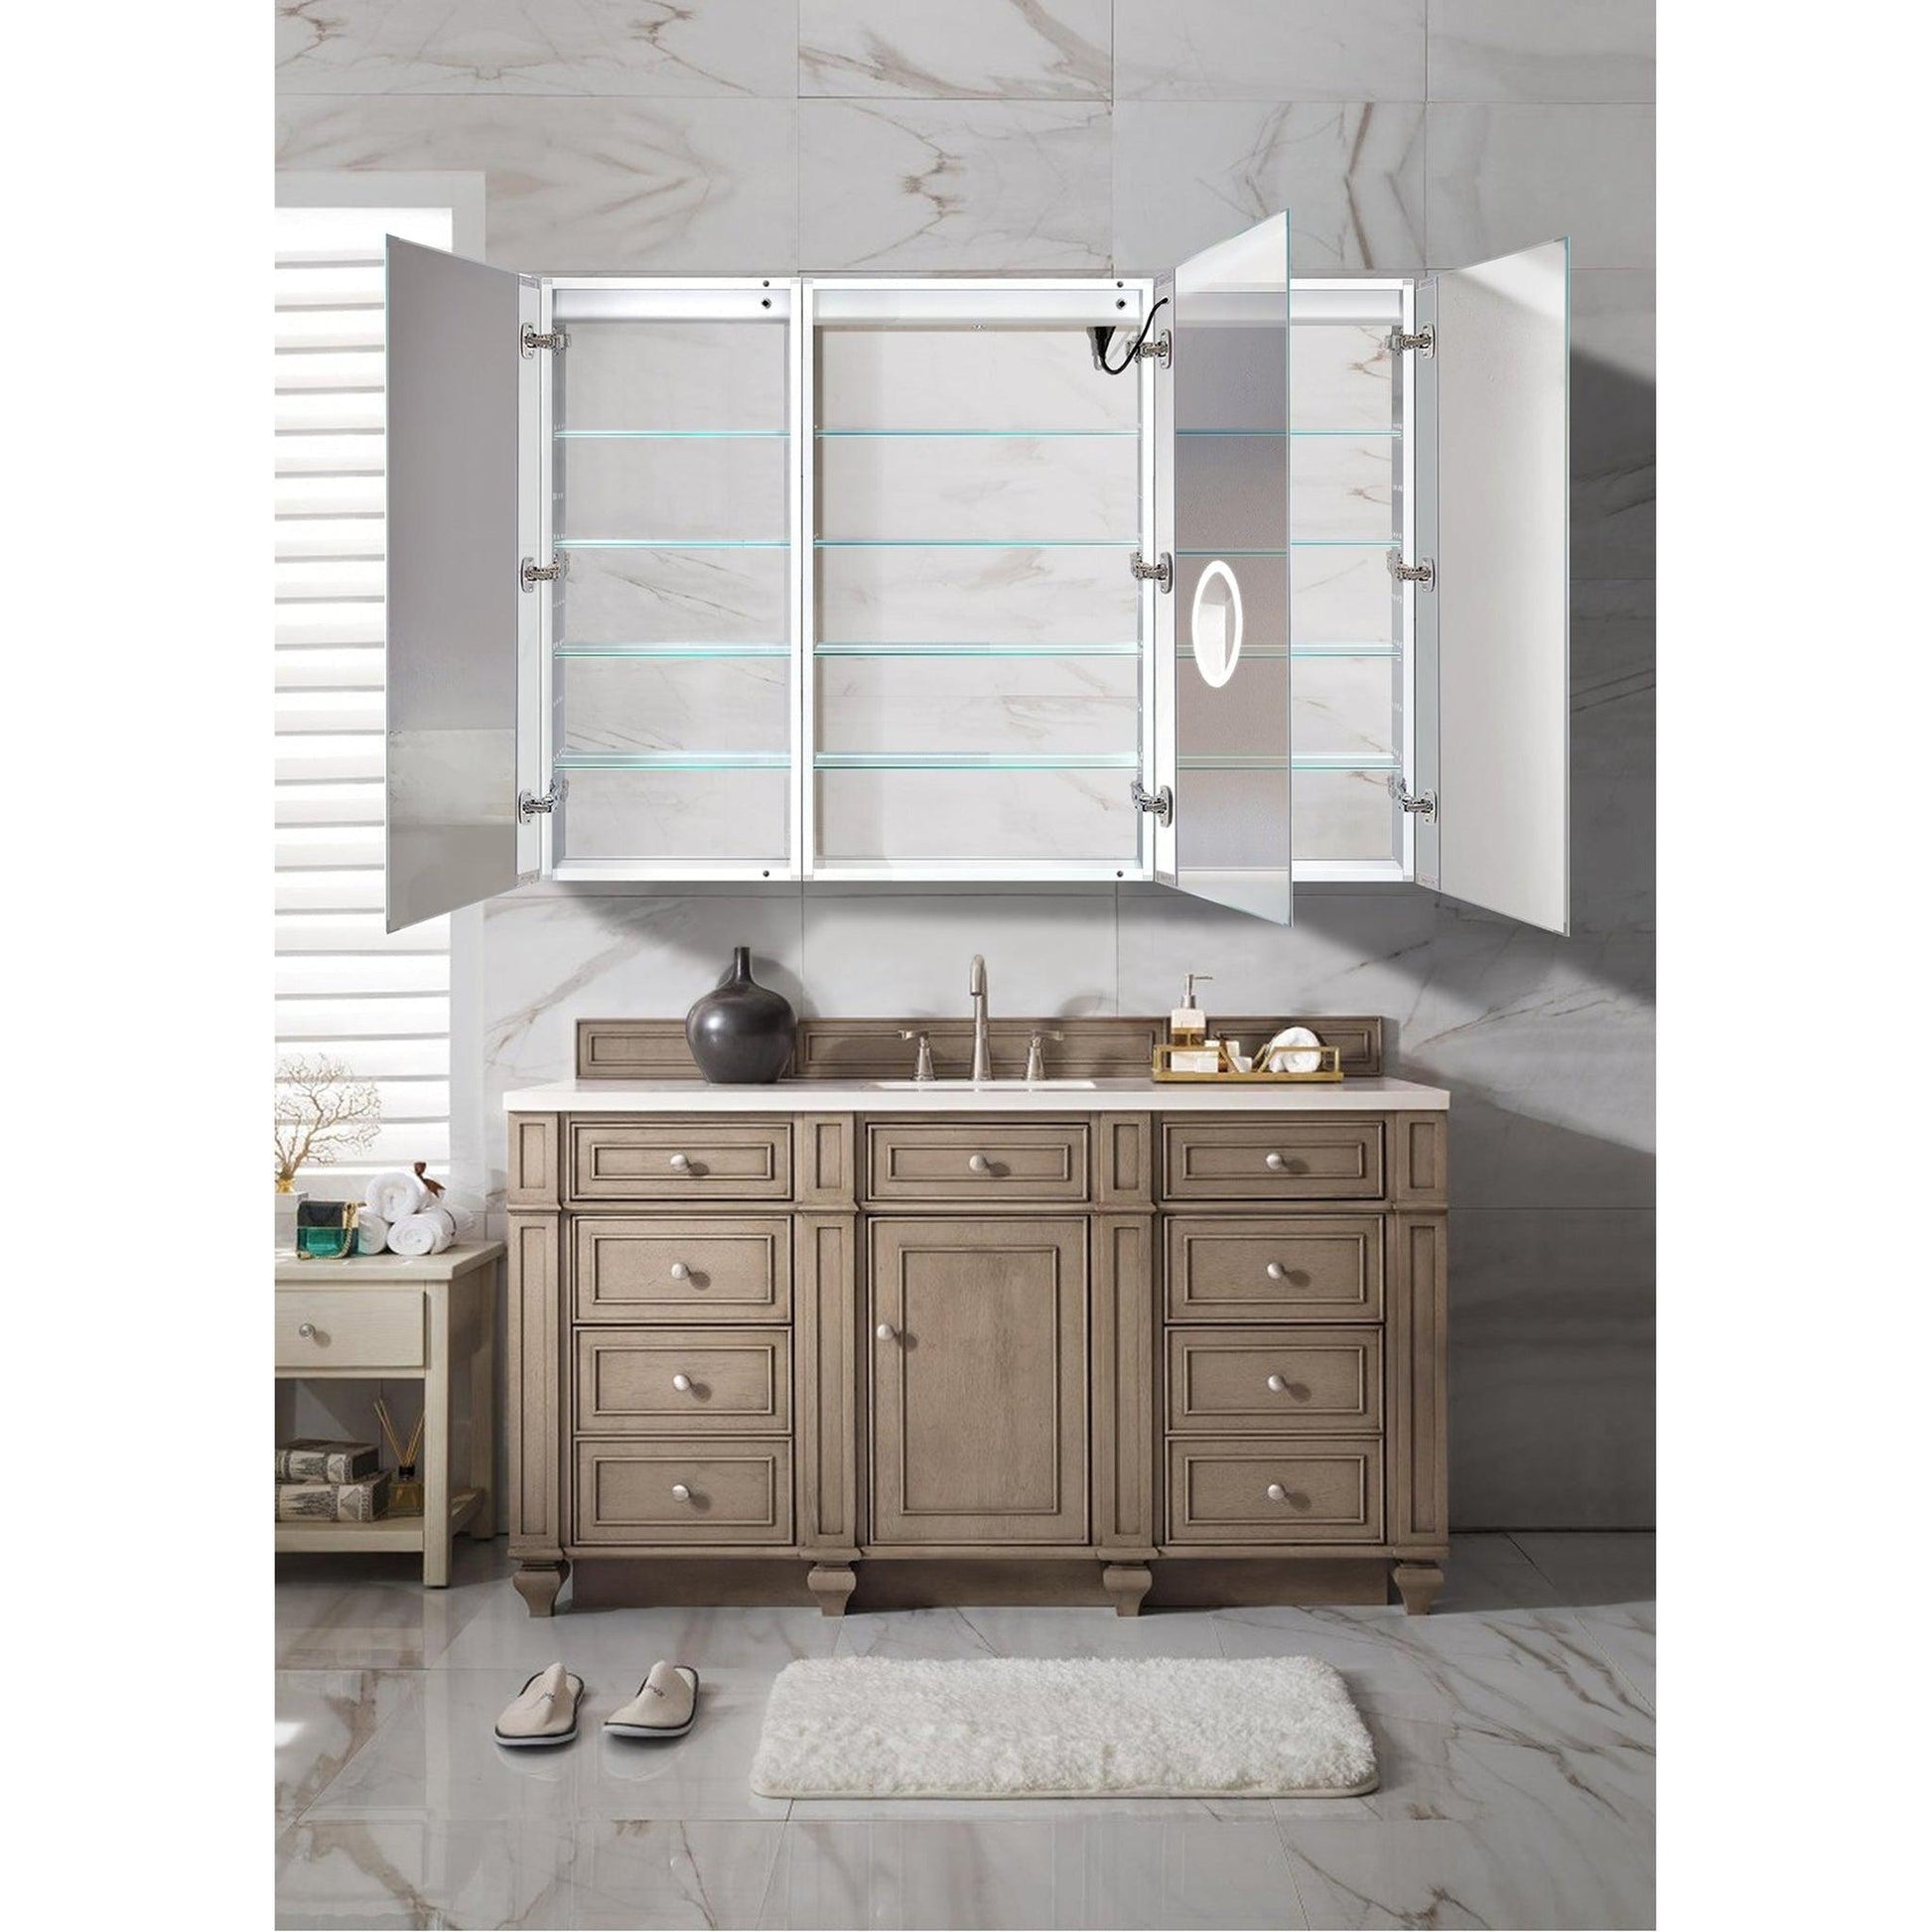 Krugg Reflections Svange 60" x 42" 5000K Single Tri-View Left-Right-Right Opening Recessed/Surface-Mount Illuminated Silver Backed LED Medicine Cabinet Mirror With Built-in Defogger, Dimmer and Electrical Outlet